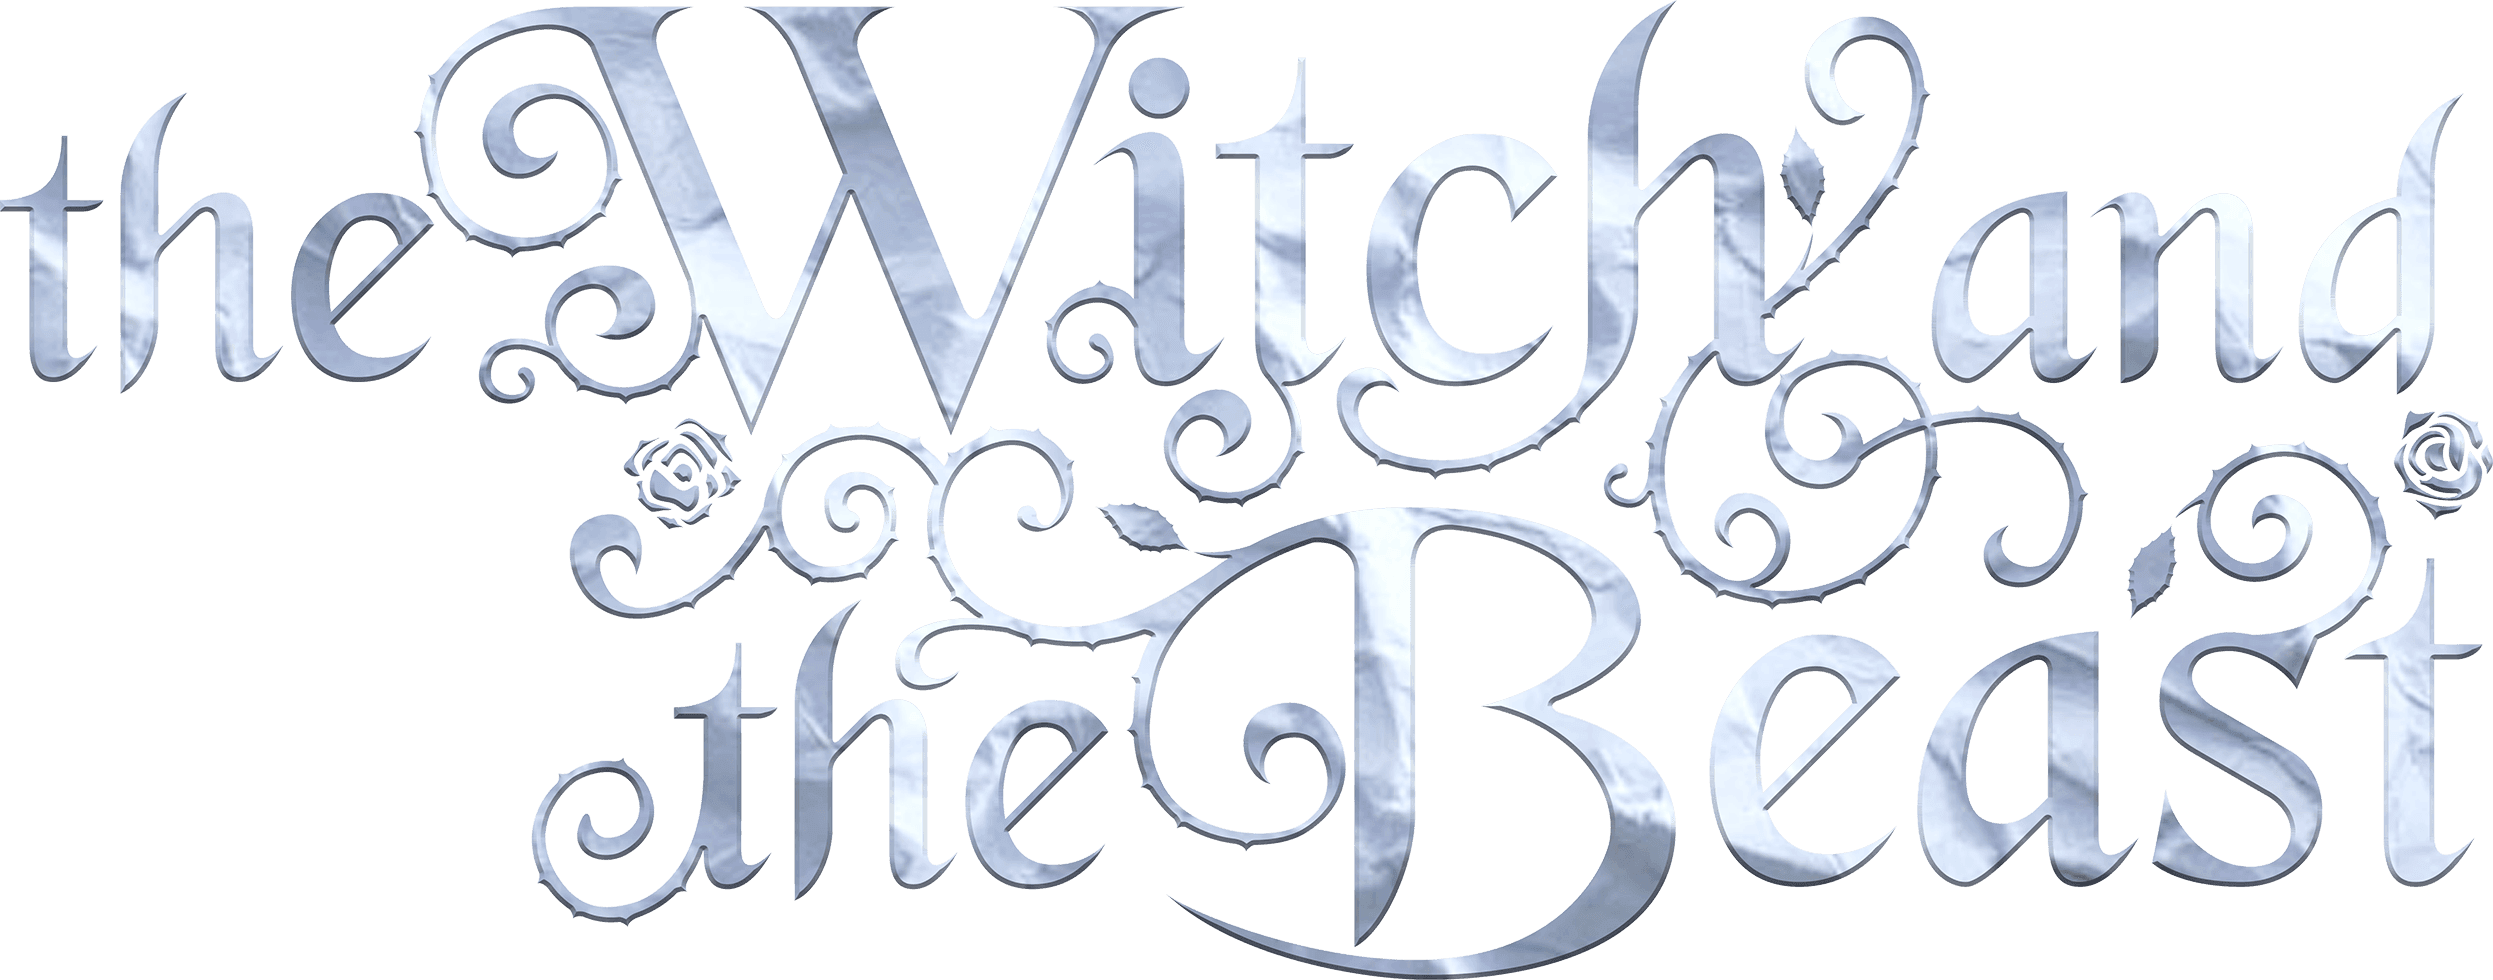 The Witch and the Beast logo